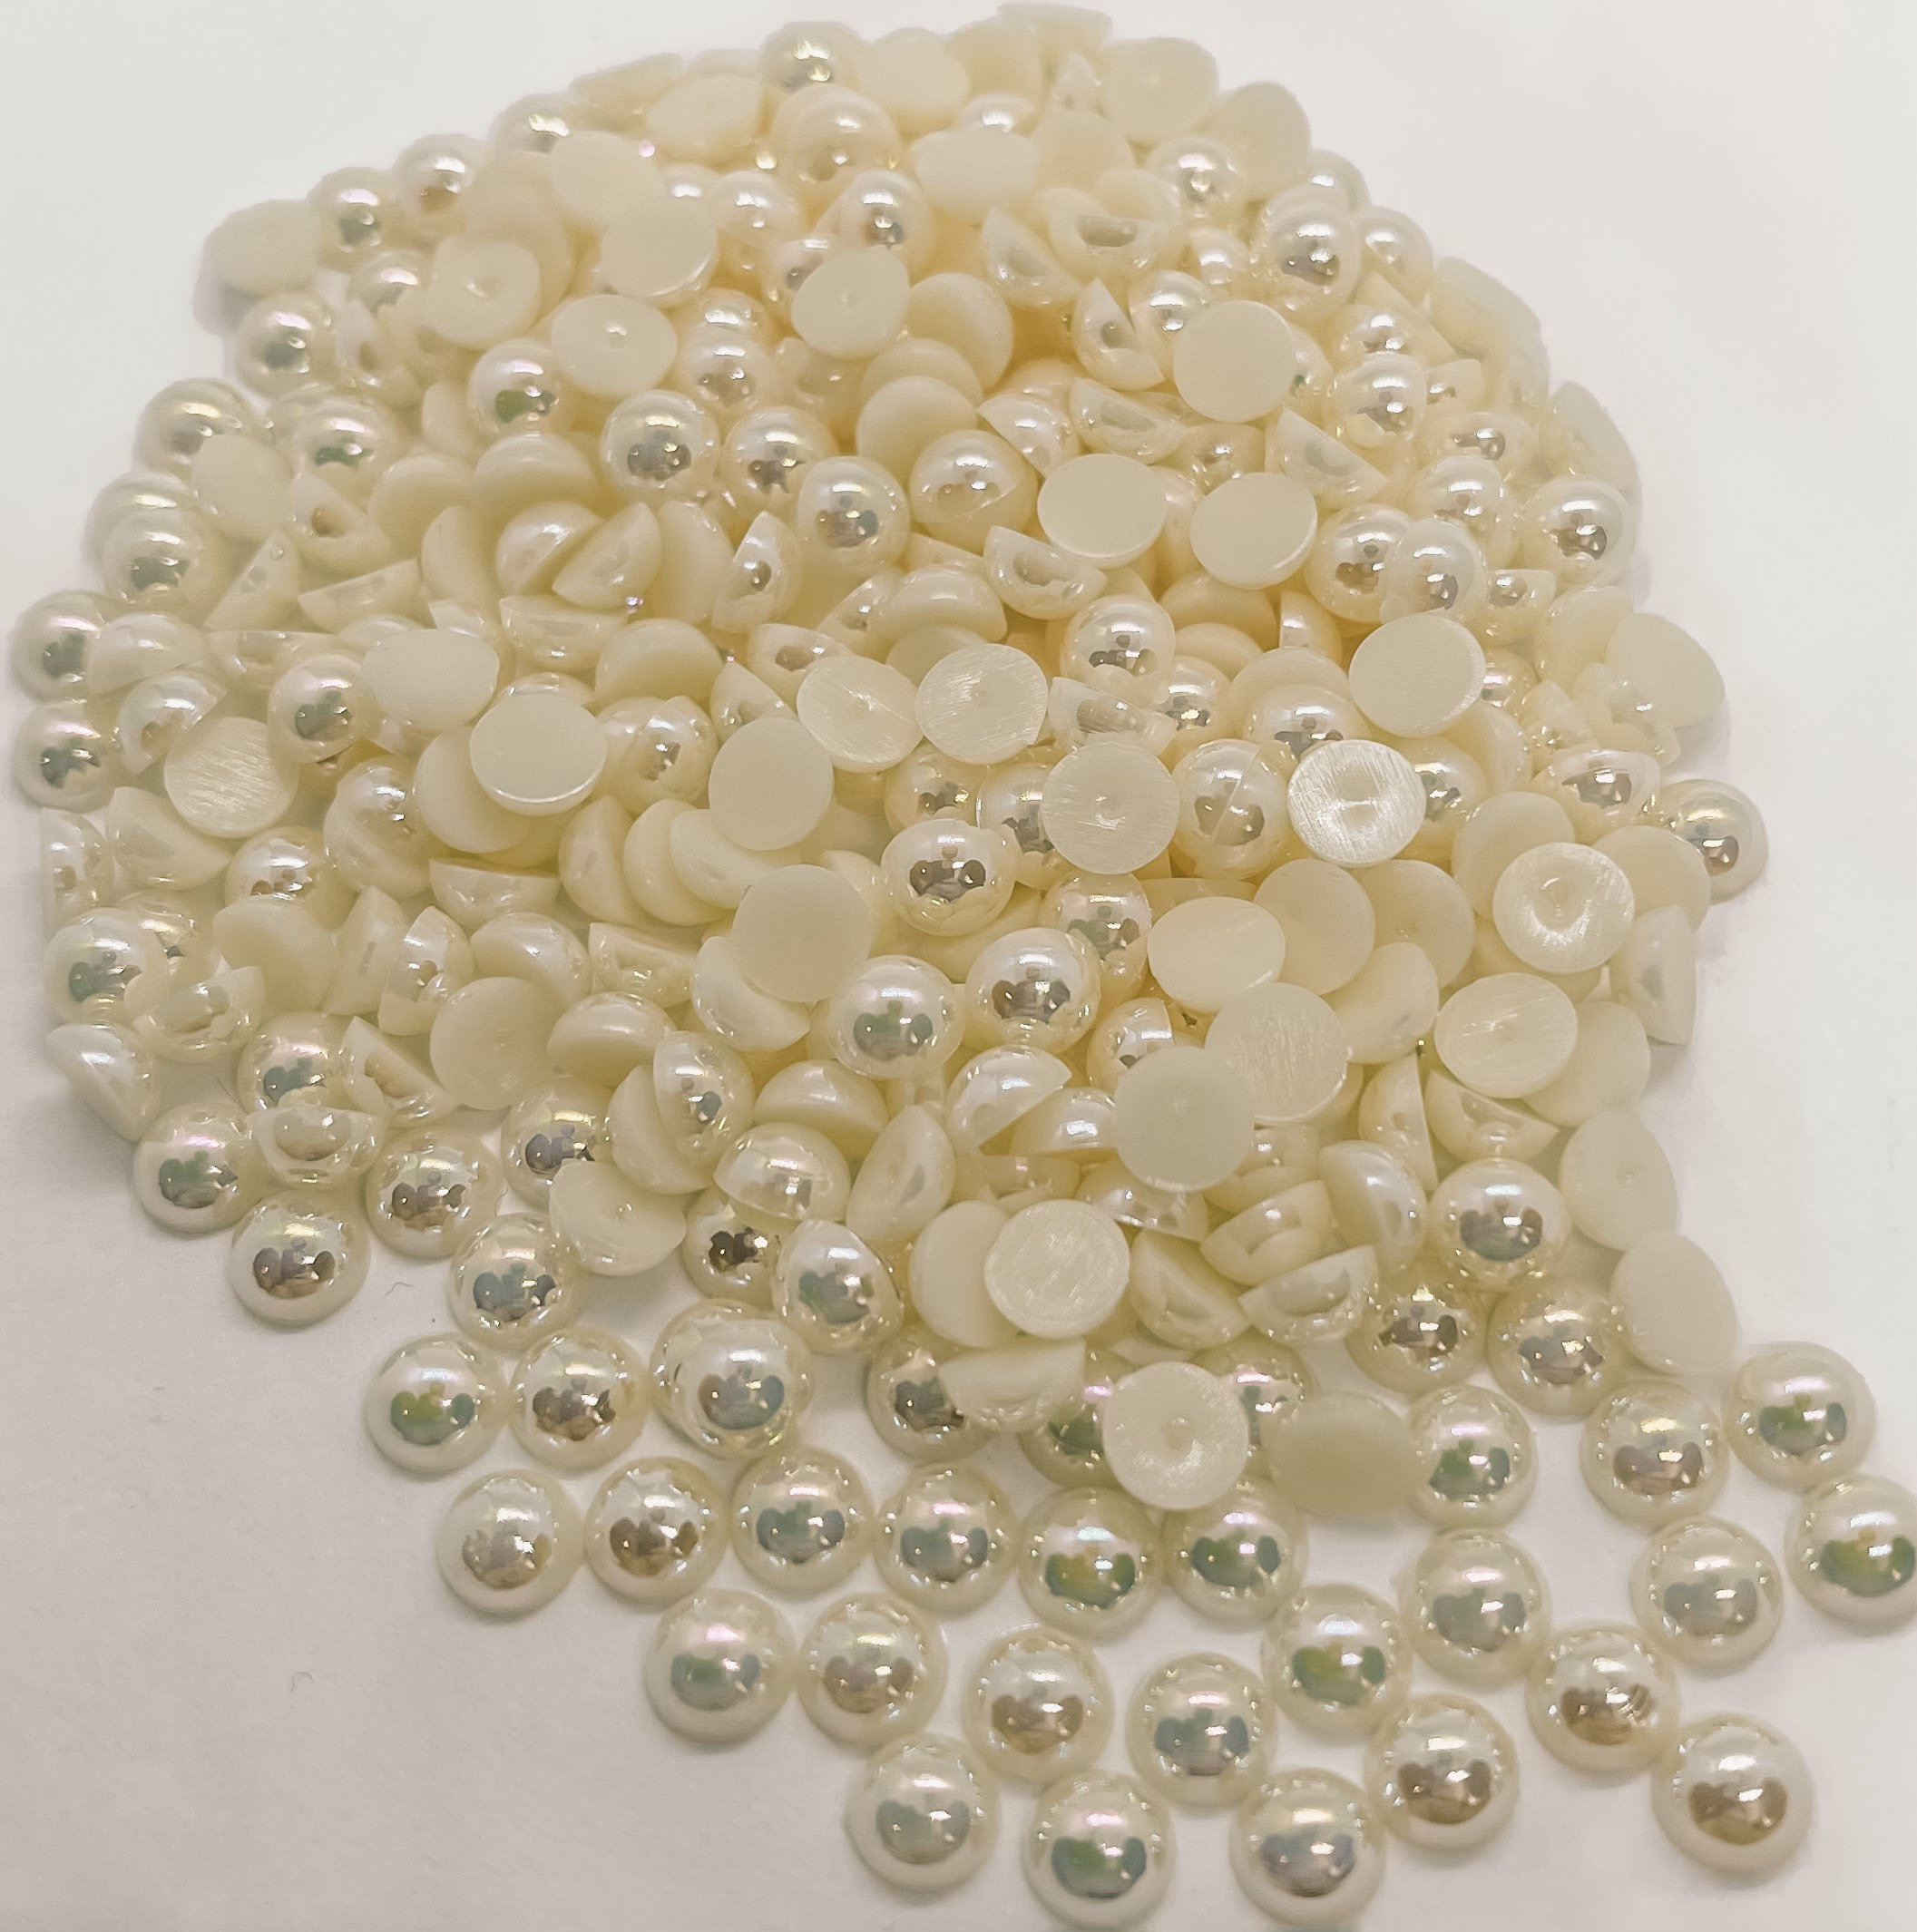 5mm Acrylic Off White Flat Back Pearls-0409-78